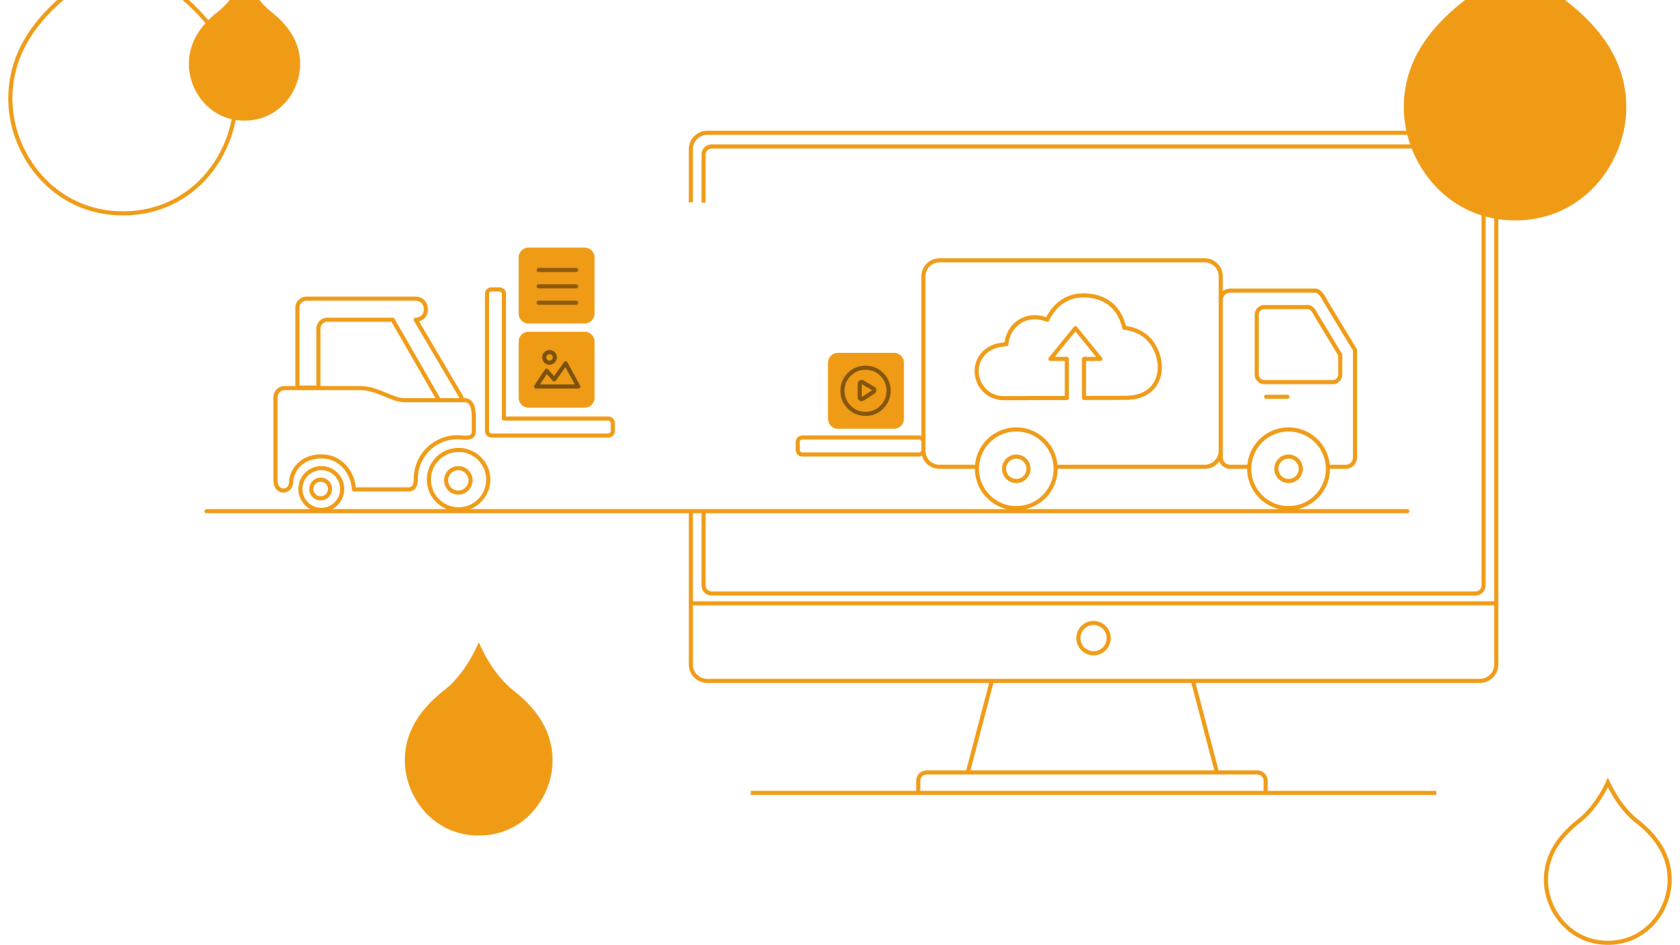 yellow acquia droplets with an illustration of trucks carrying in media files into another truck 